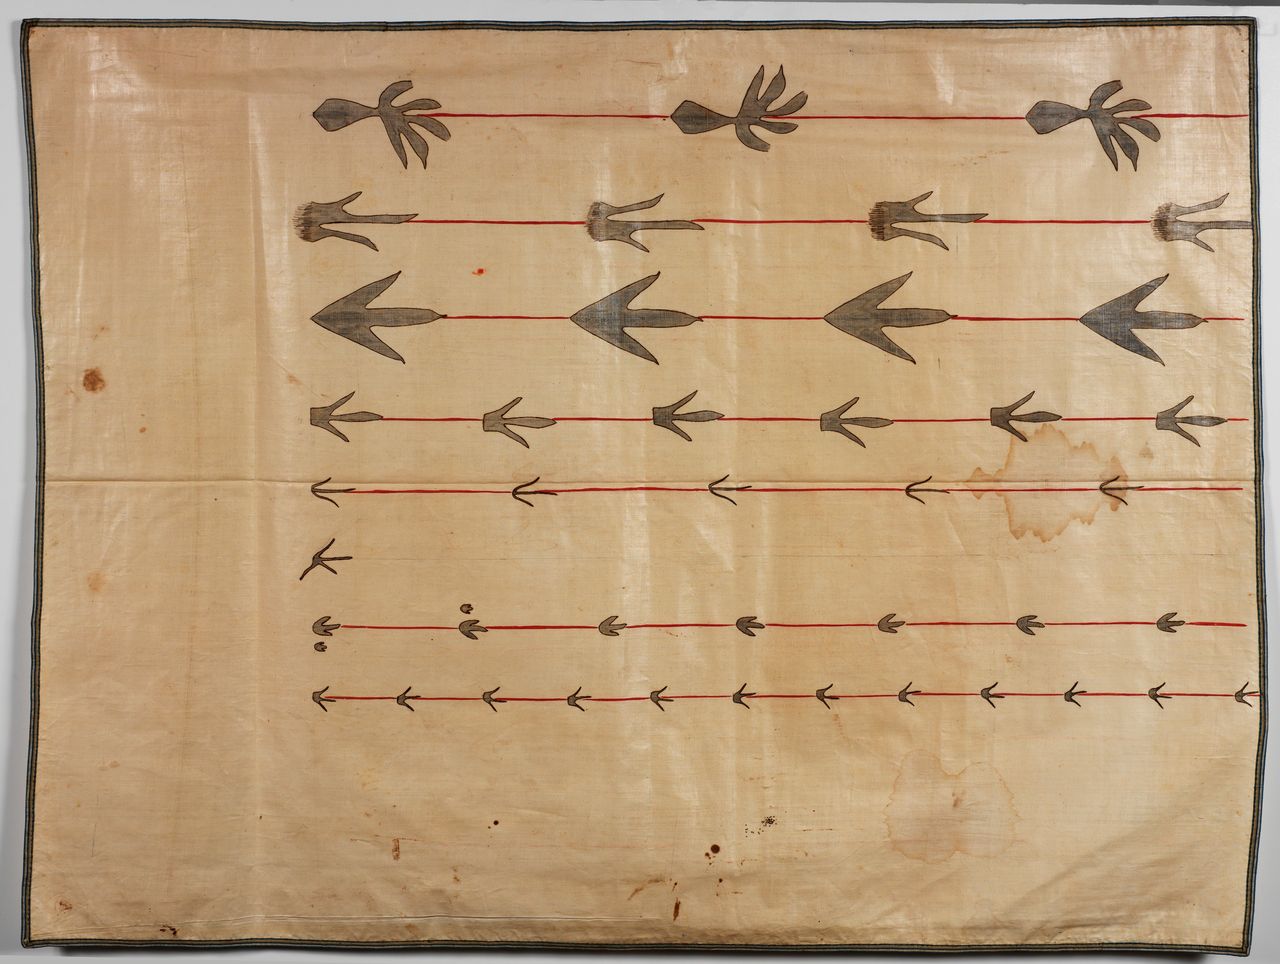 Orra White Hitchcock's "Seven Lines of Fossil Footprints" (1828–1840).